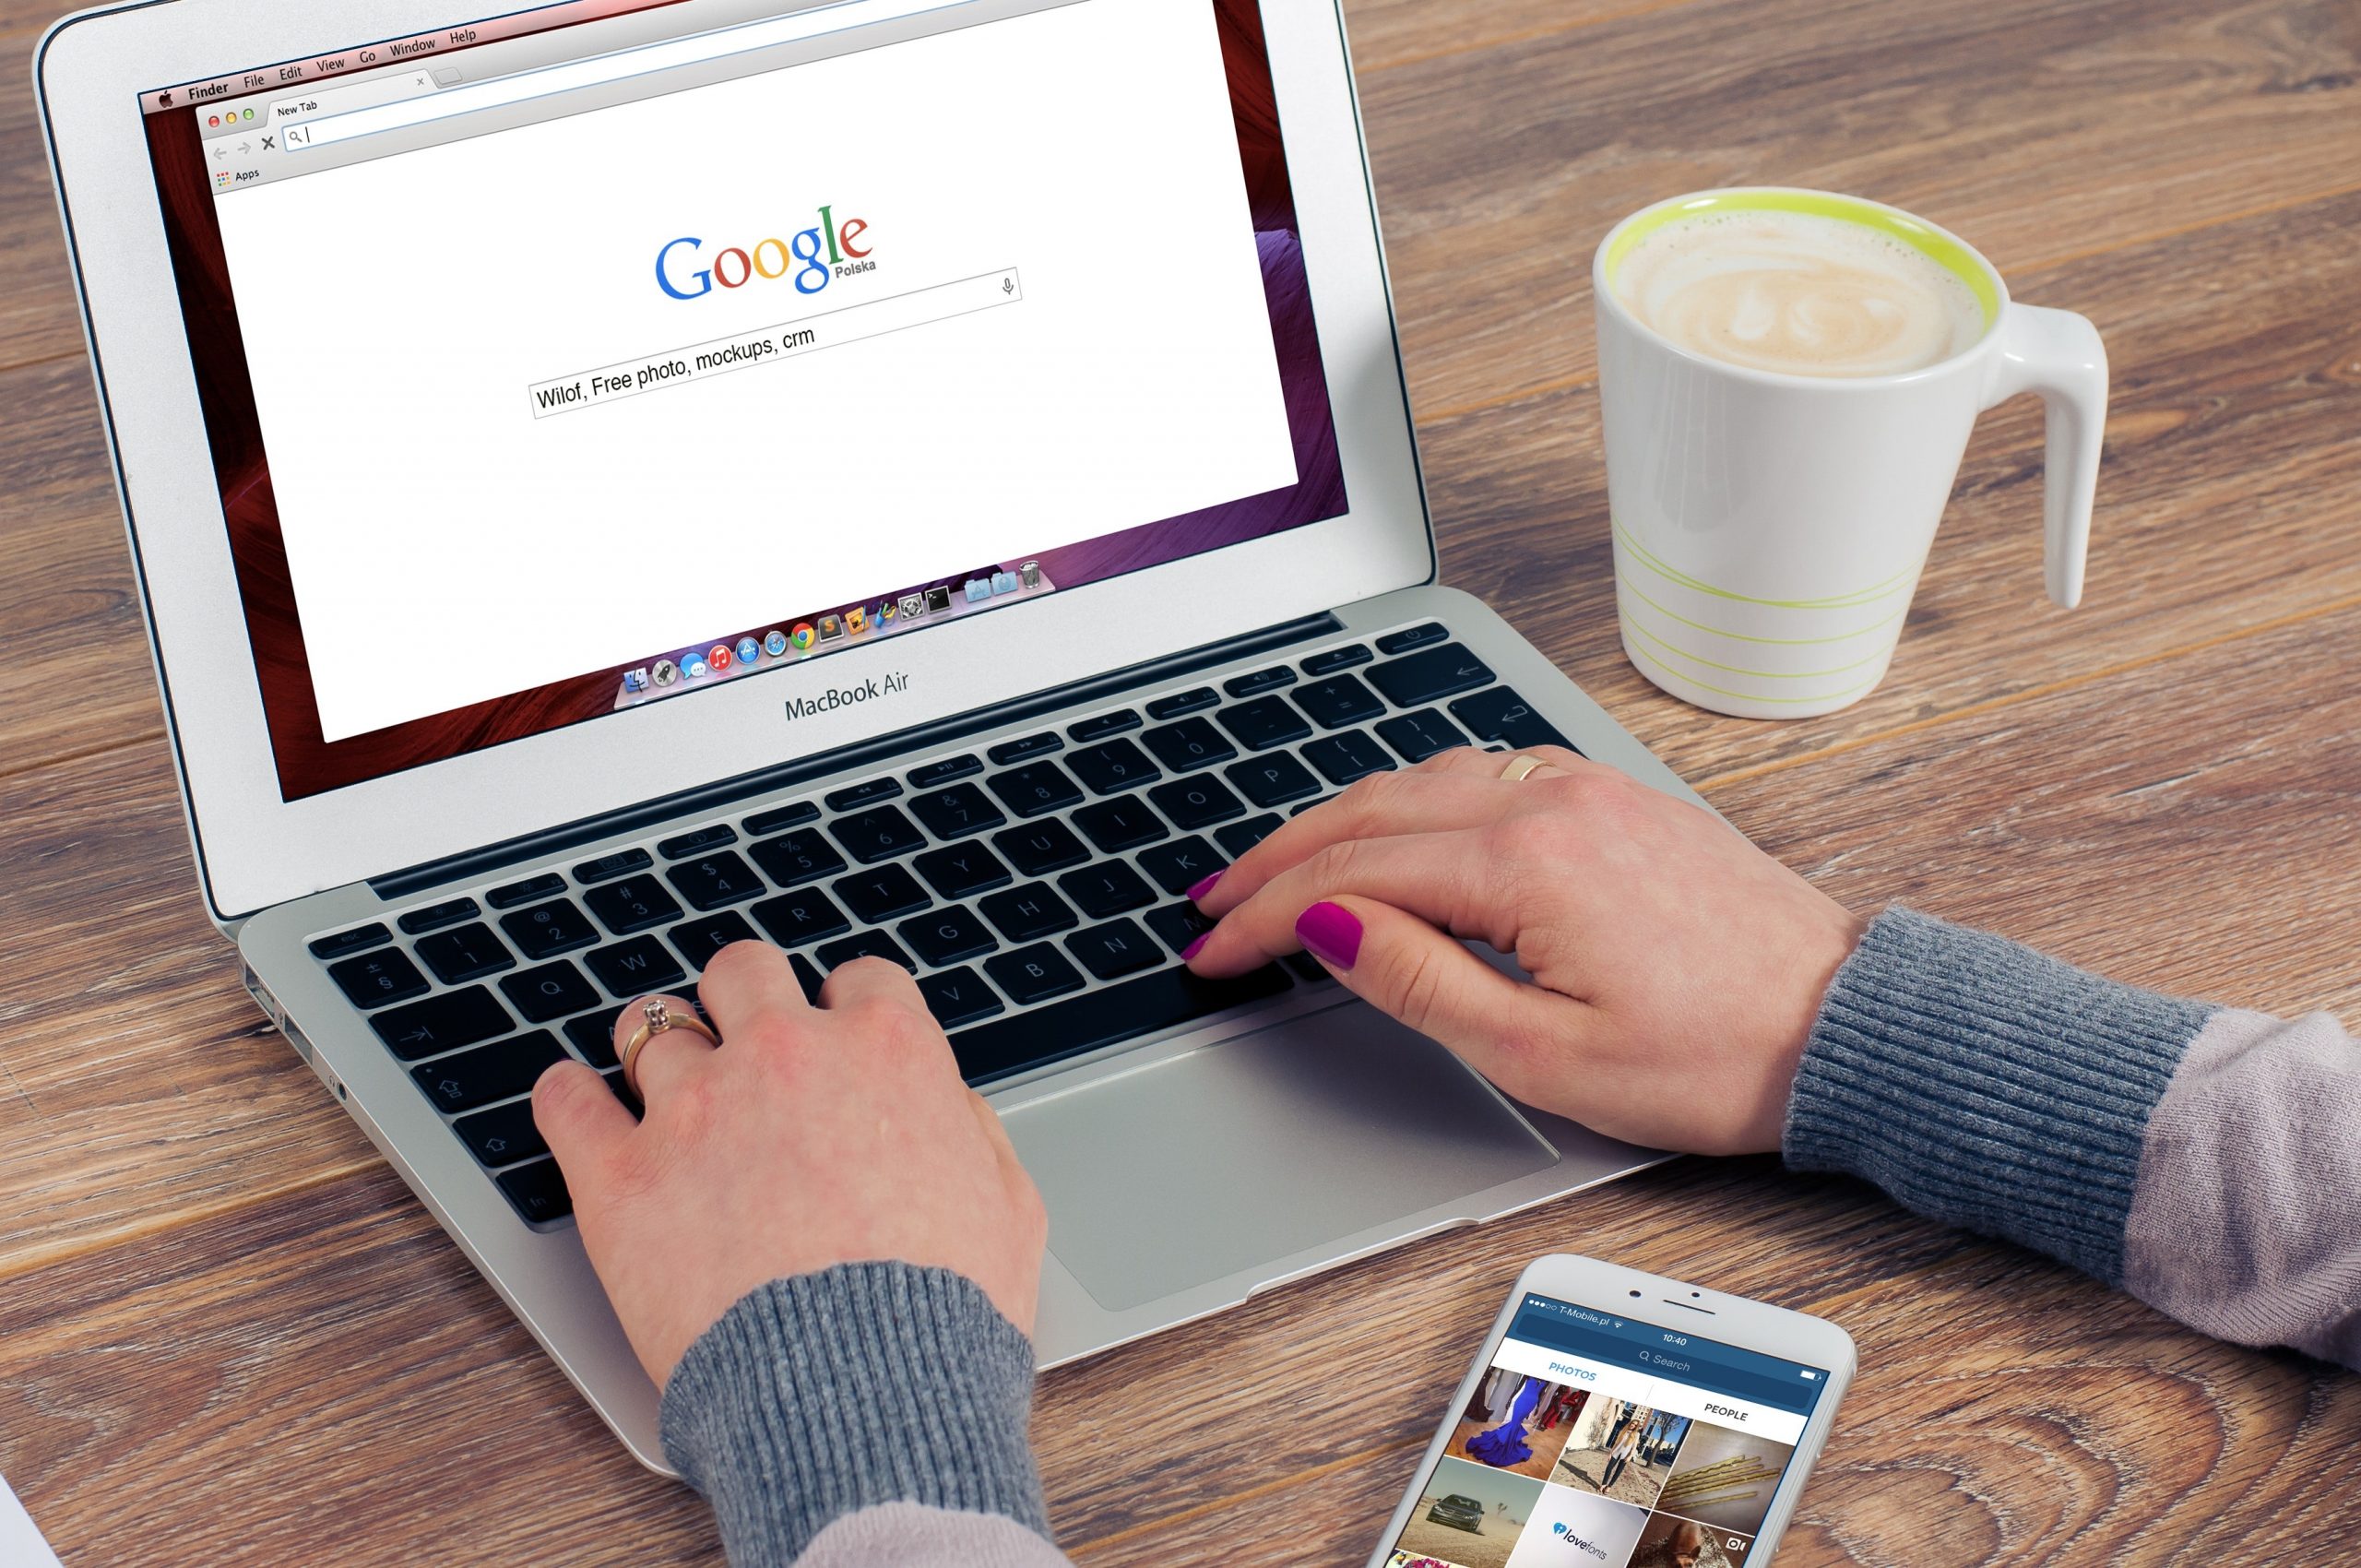 Why is it important for businesses to rank on Google search?